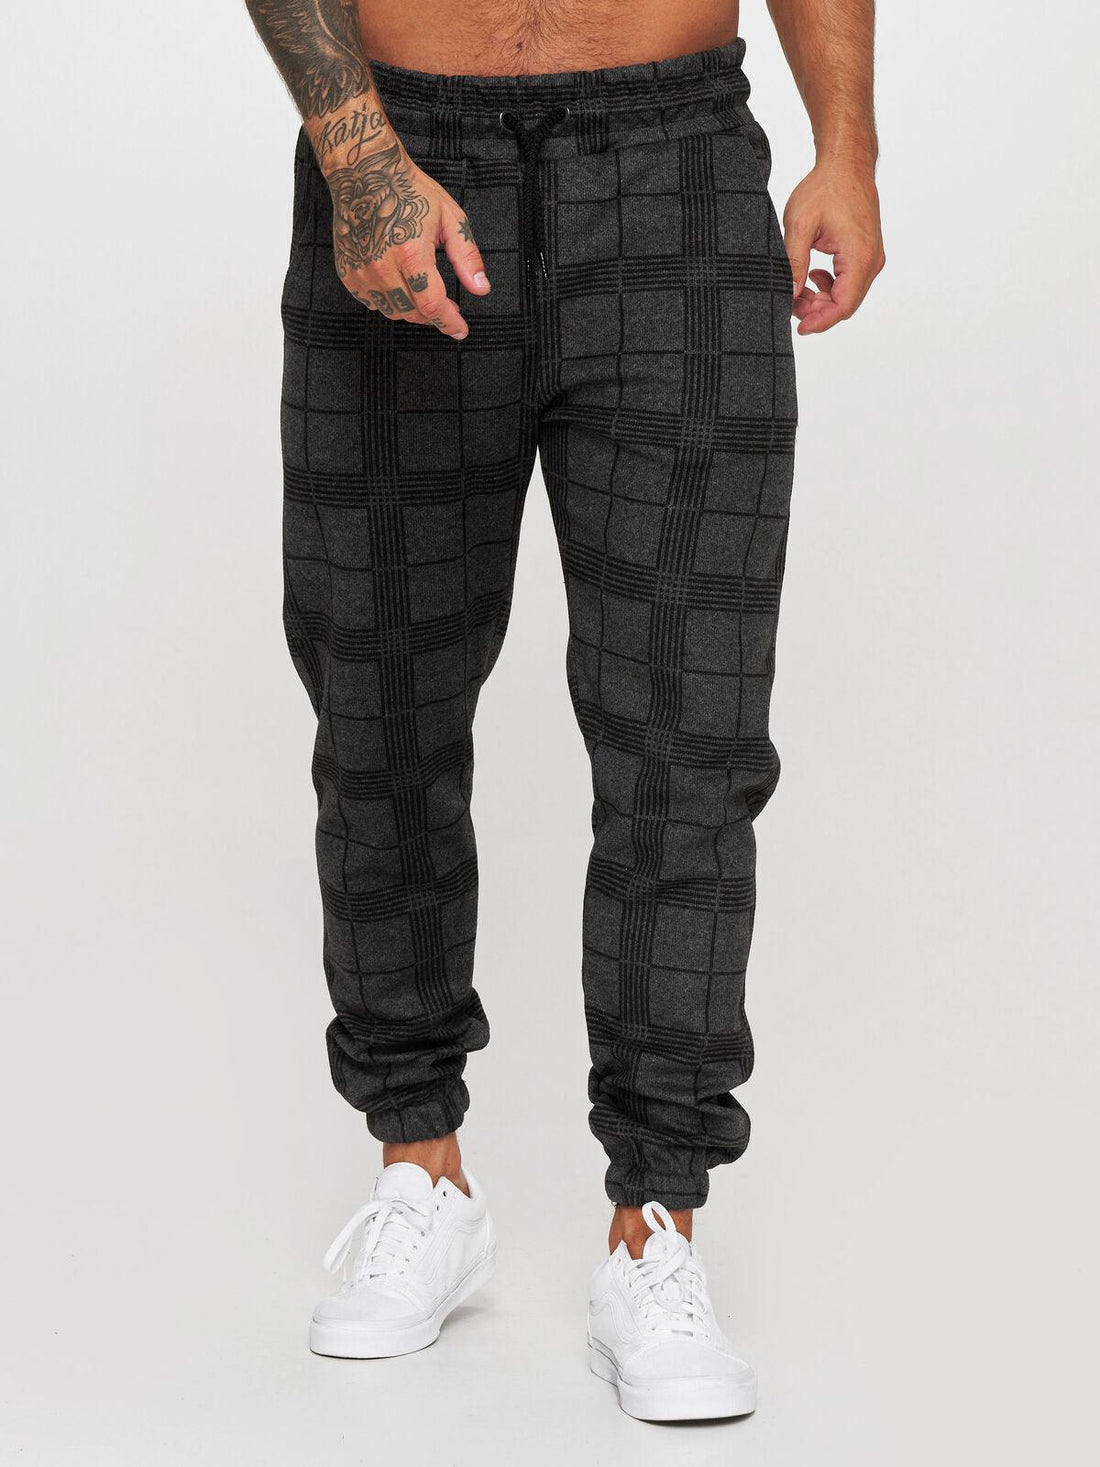 Checkered 3D Digital Print Casual Pants - Fashion - Your-Look